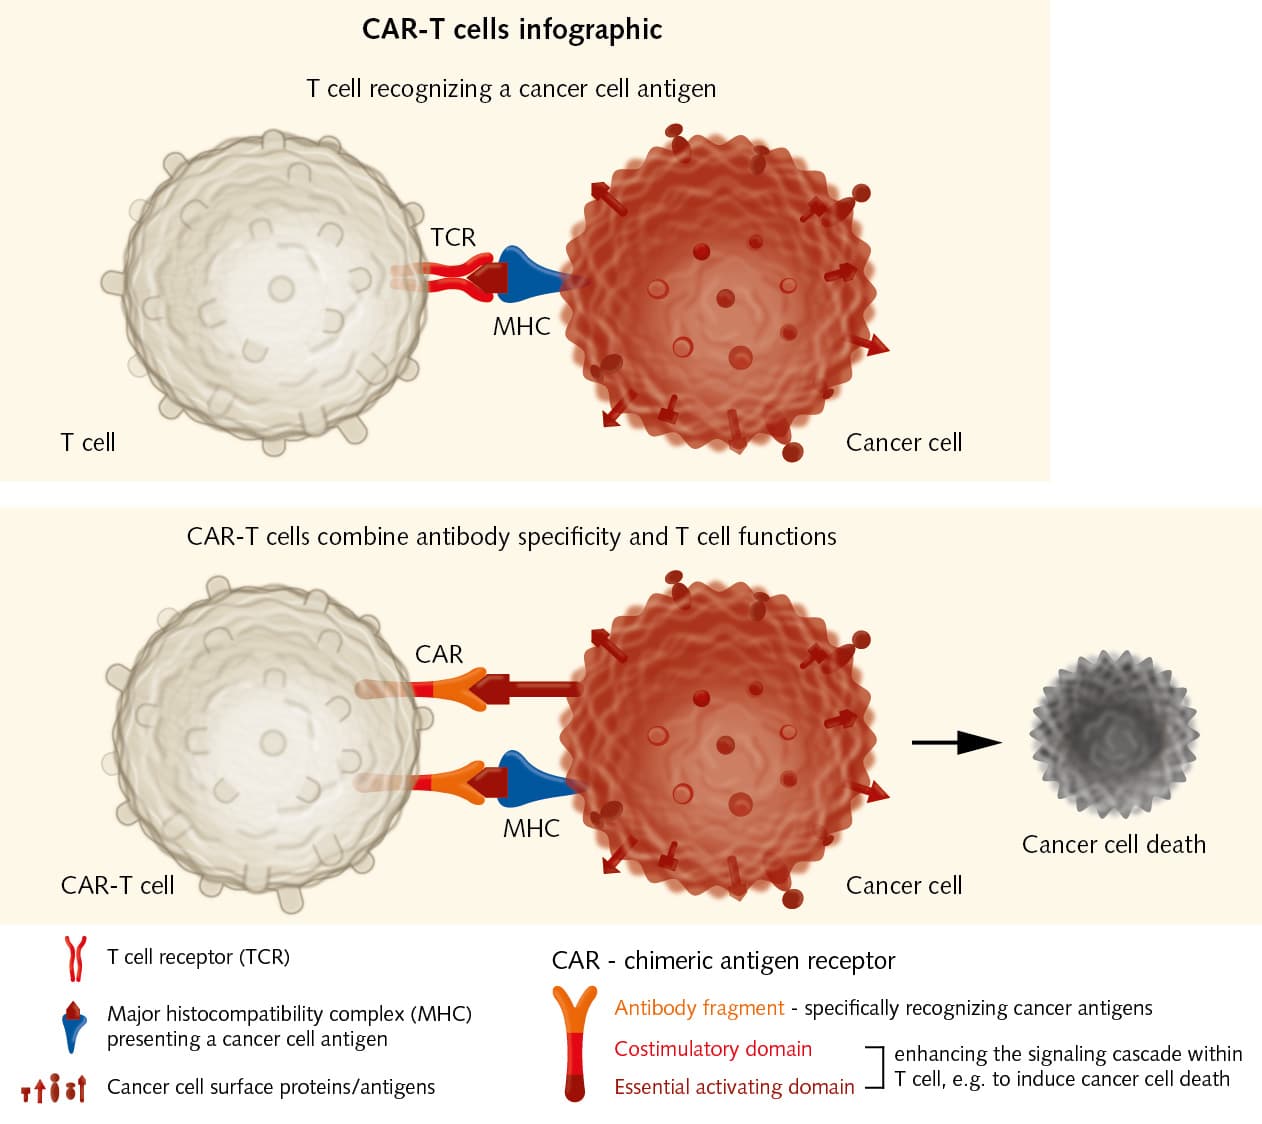 CAR-T cells infographic